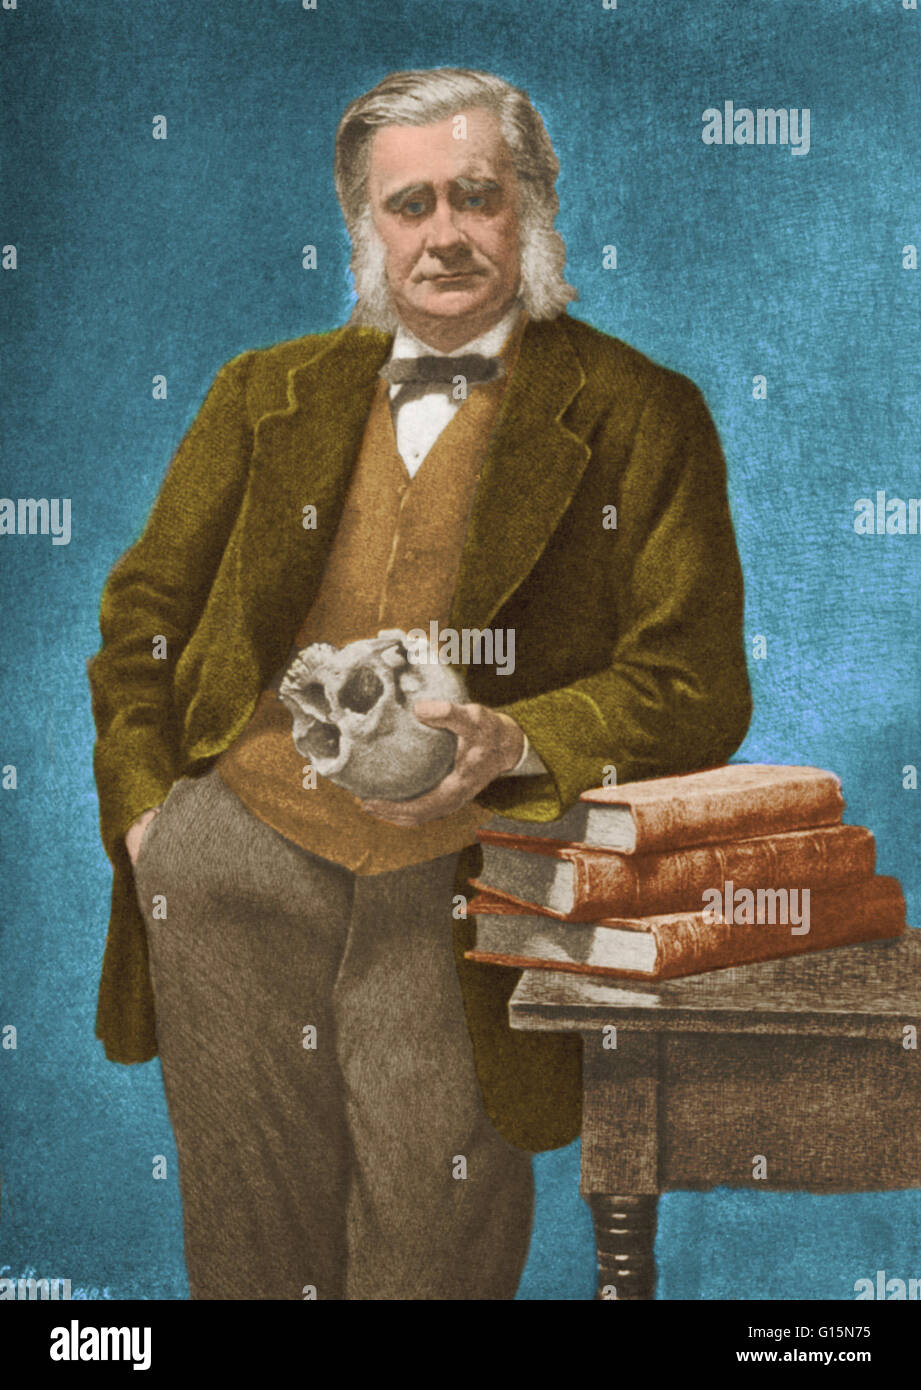 Thomas Henry Huxley (1825-1895) was an English biologist, known as 'Darwin's Bulldog' for his advocacy of Charles Darwin's theory of evolution. Huxley's famous 1860 debate with Samuel Wilberforce was a key moment in the wider acceptance of evolution, and Stock Photo